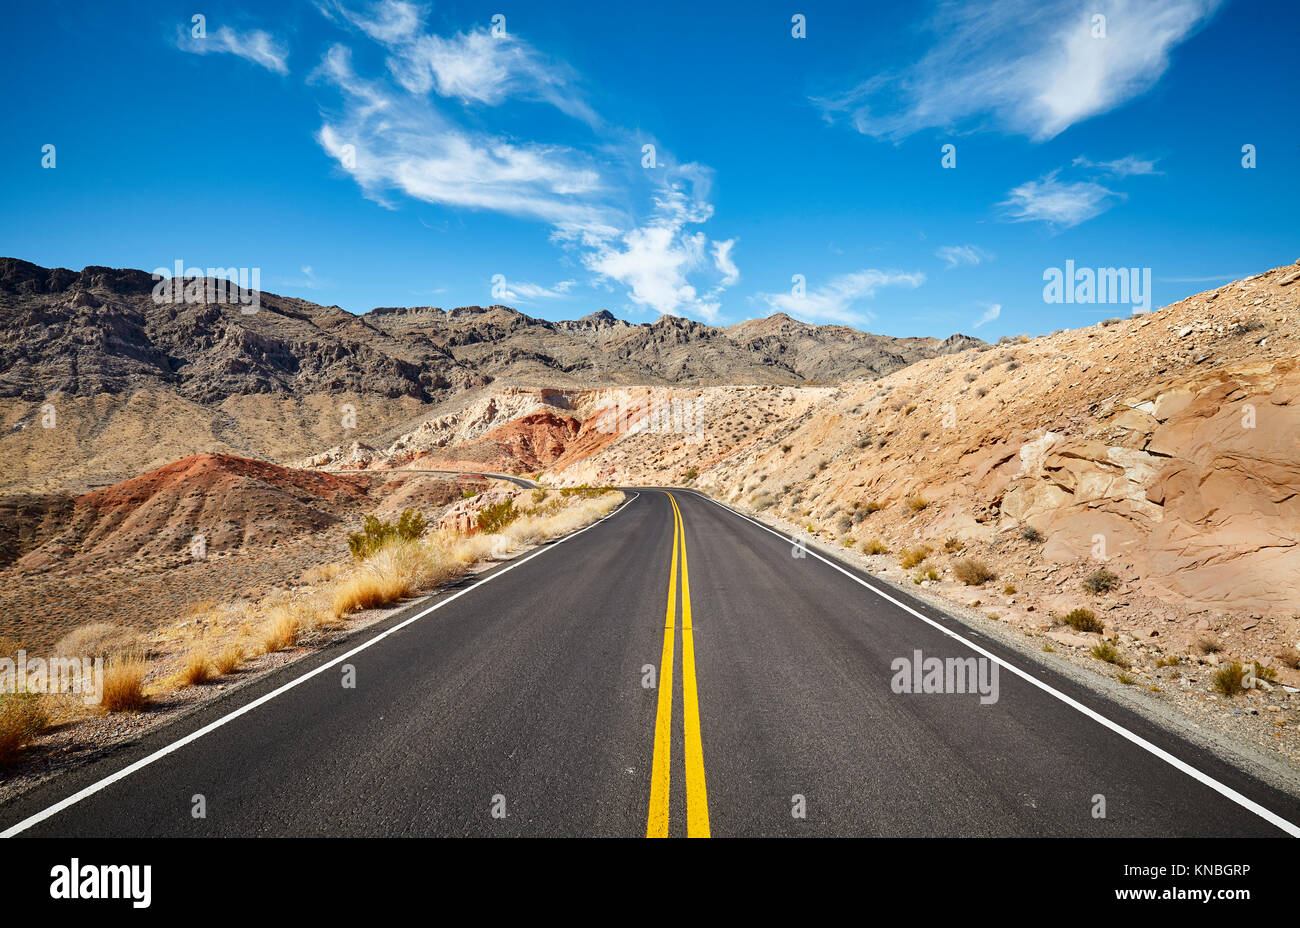 Scenic desert road, travel concept picture, Valley of Fire State Park, Nevada, USA. Stock Photo